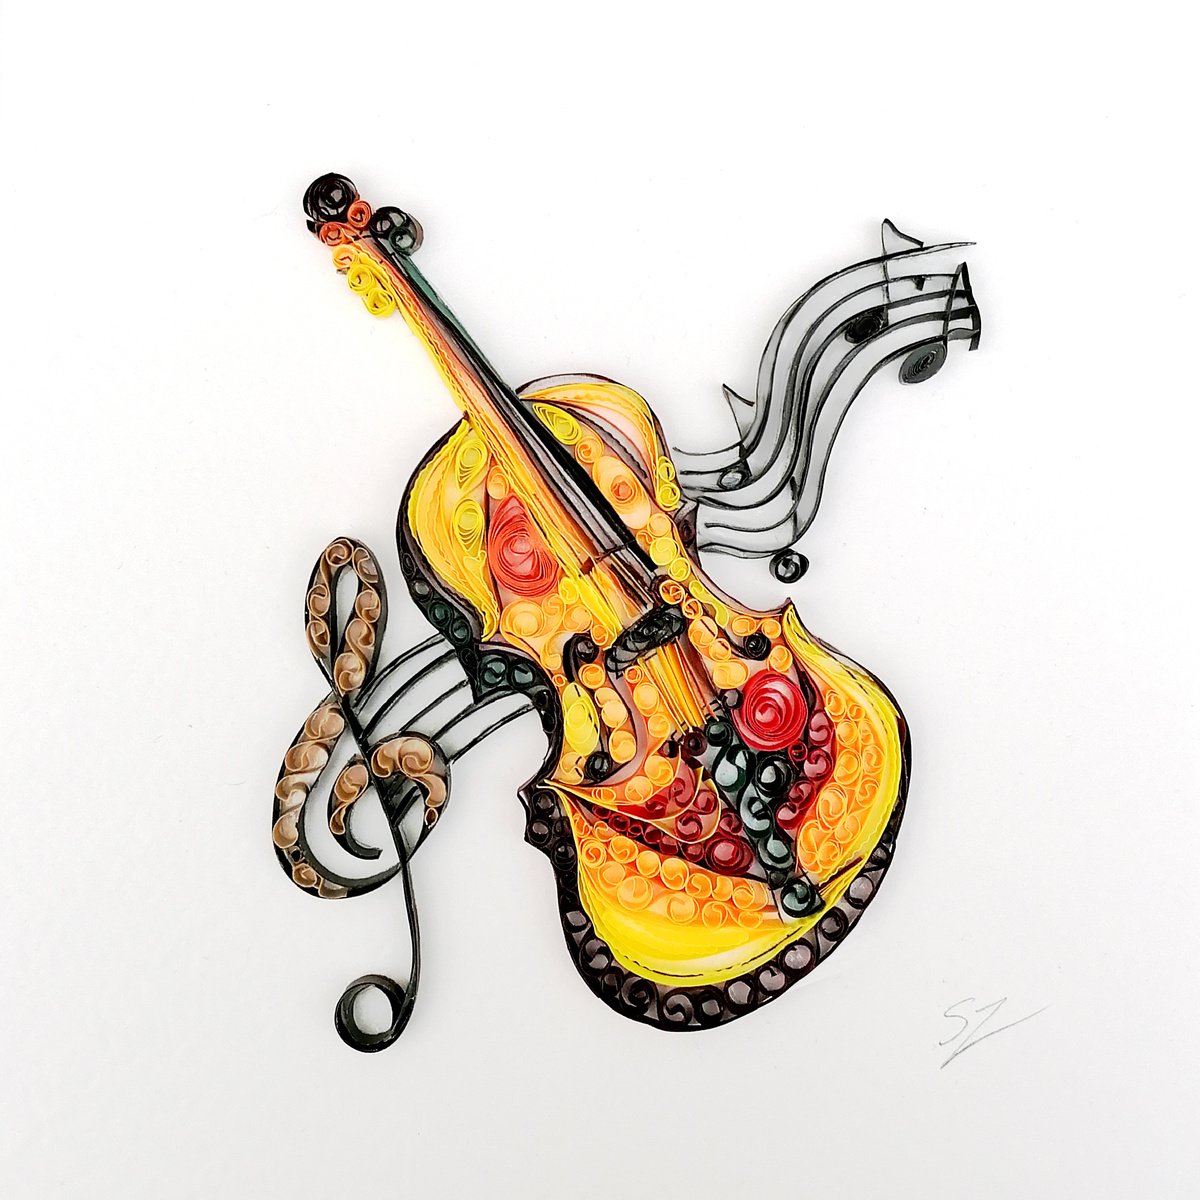 The Music, 3D Paper Art by Susana Zarate